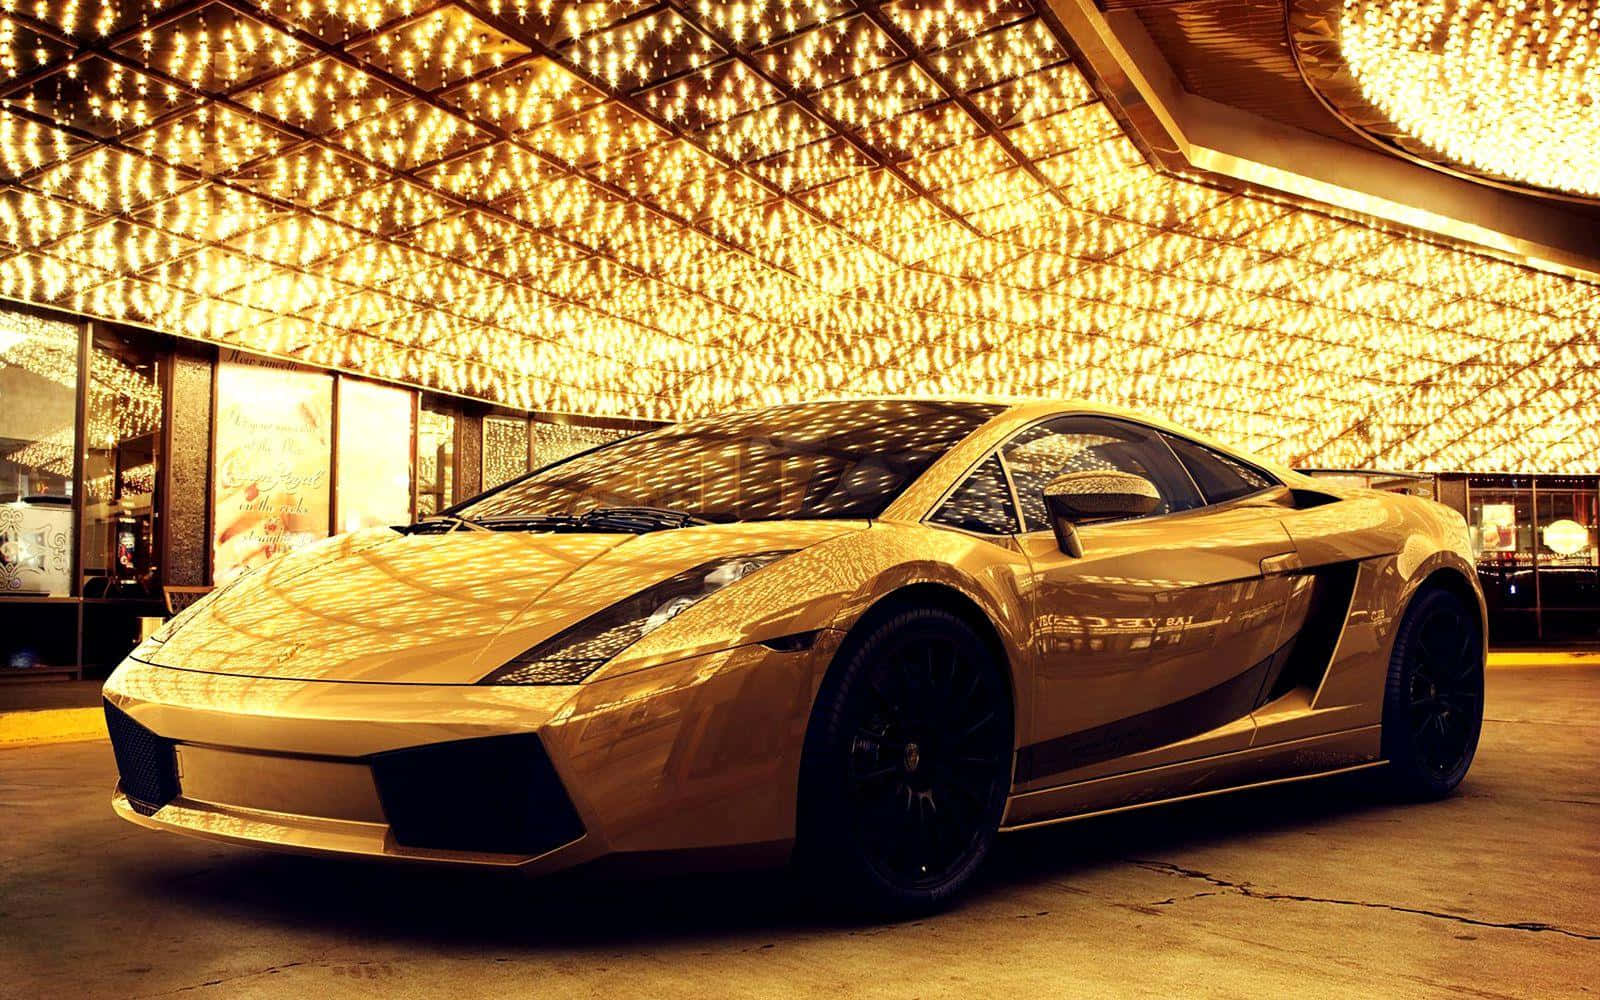 A Gold Sports Car Parked In A Casino Wallpaper